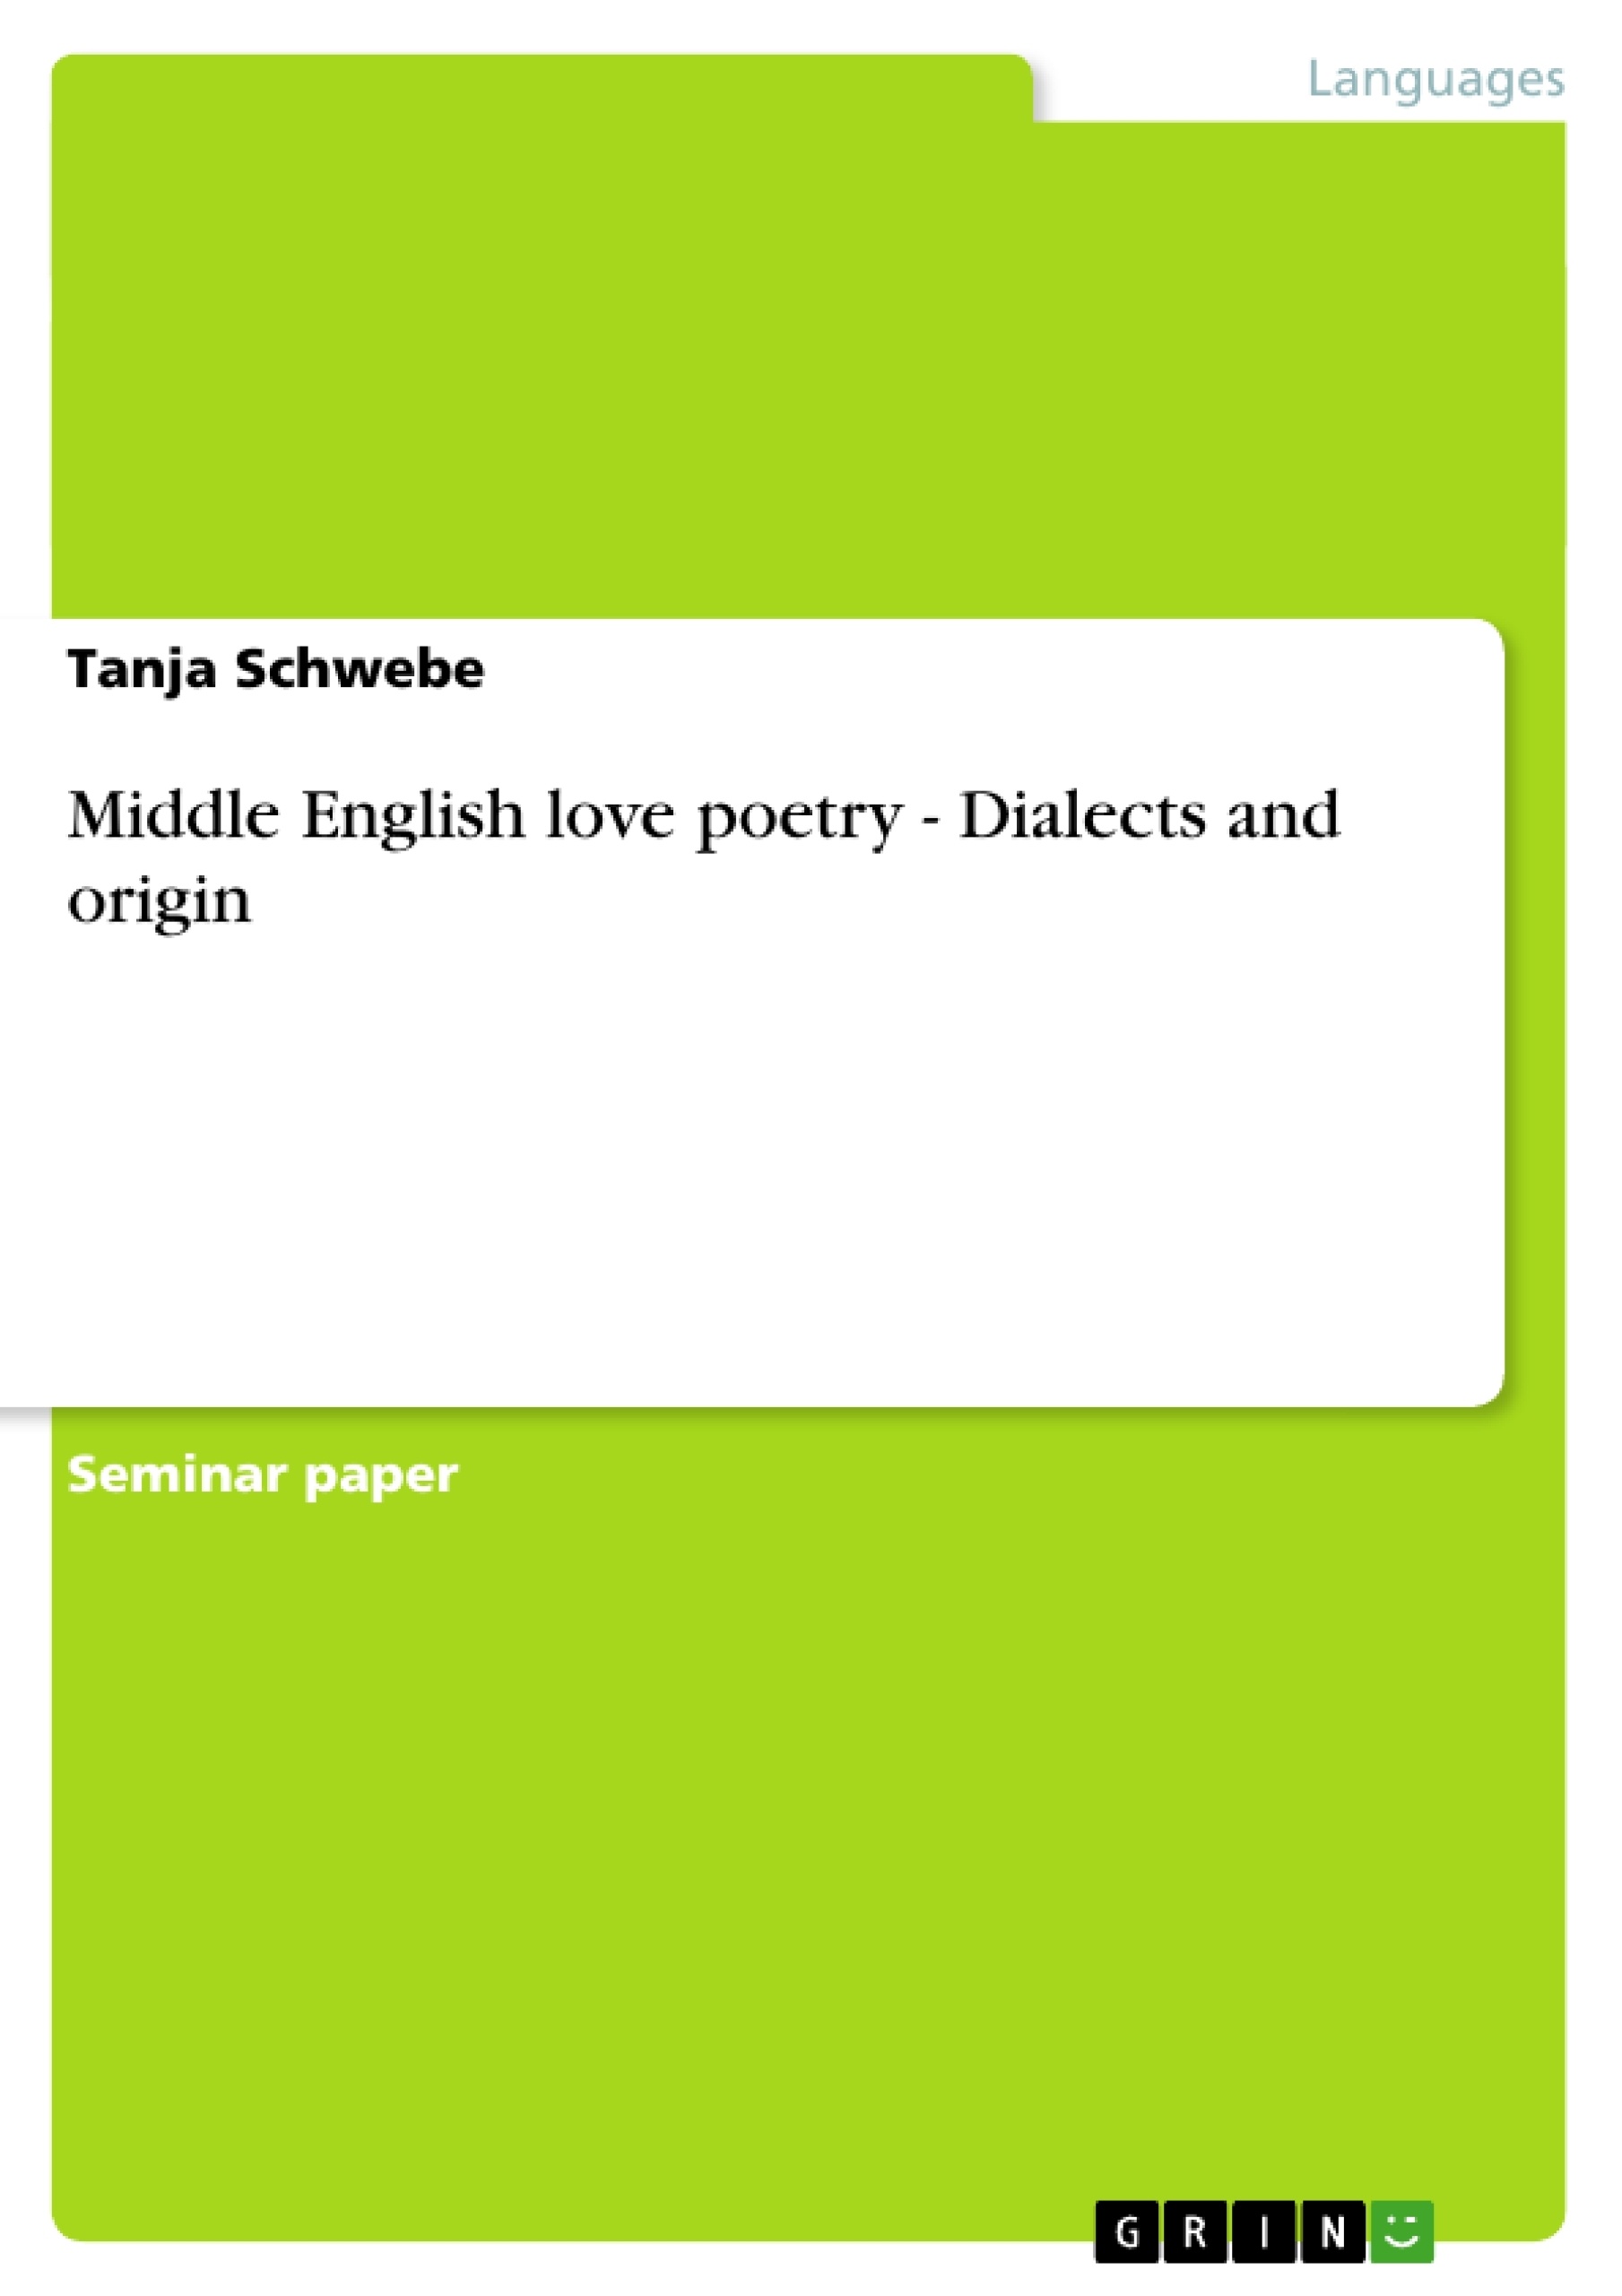 Title: Middle English love poetry - Dialects and origin